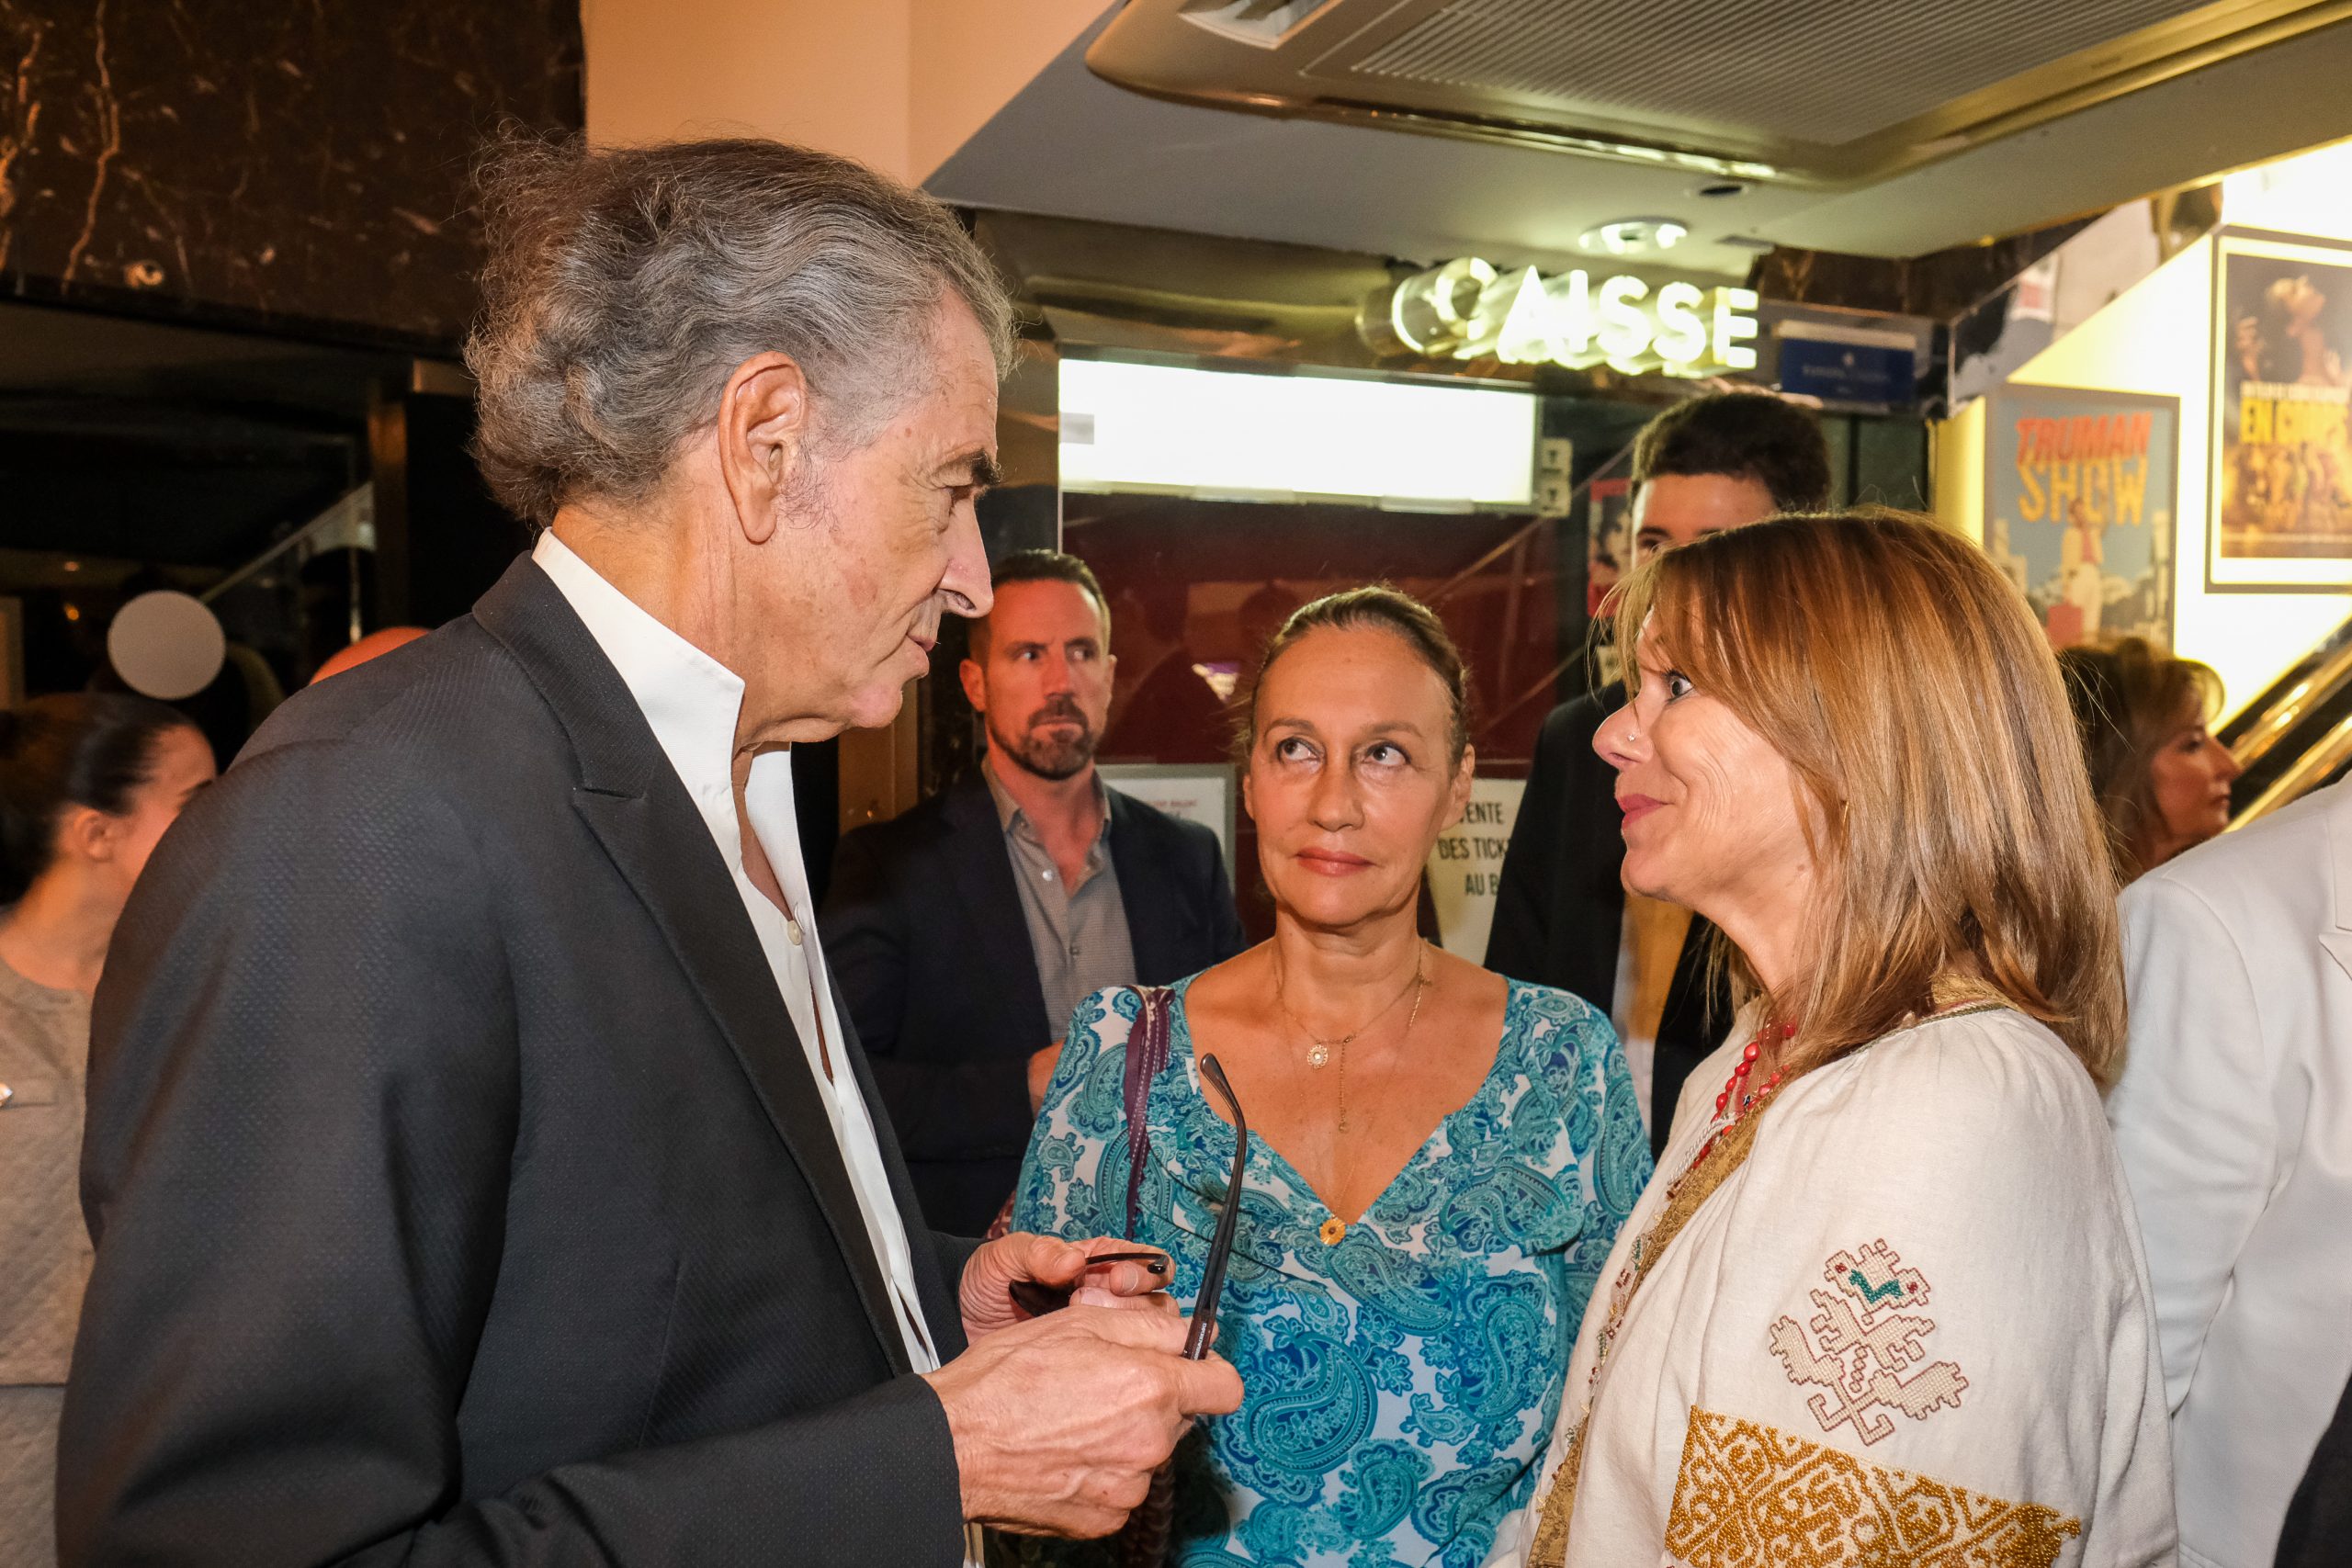 Bernard-Henri Lévy and Laurence Haïm, during the preview of BHL's film "Why Ukraine", at the Cinéma Le Balzac in Paris.